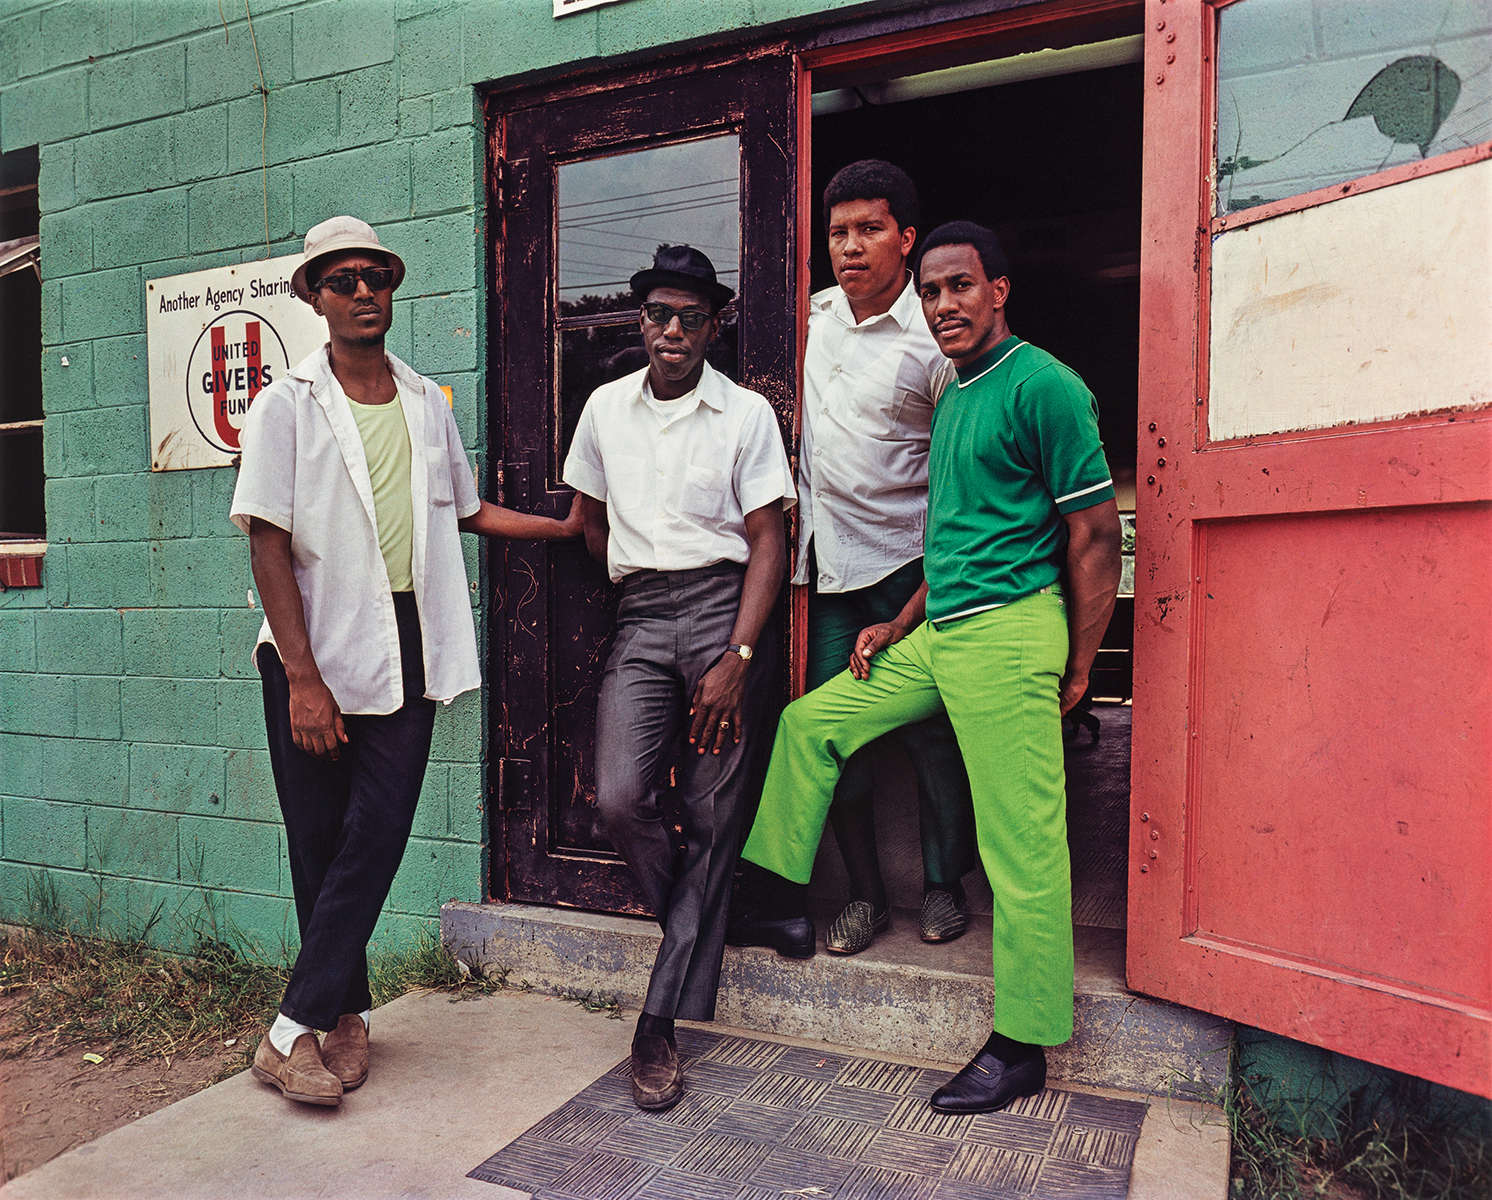 Four men stand in the doorway of a building, looking toward the camera.